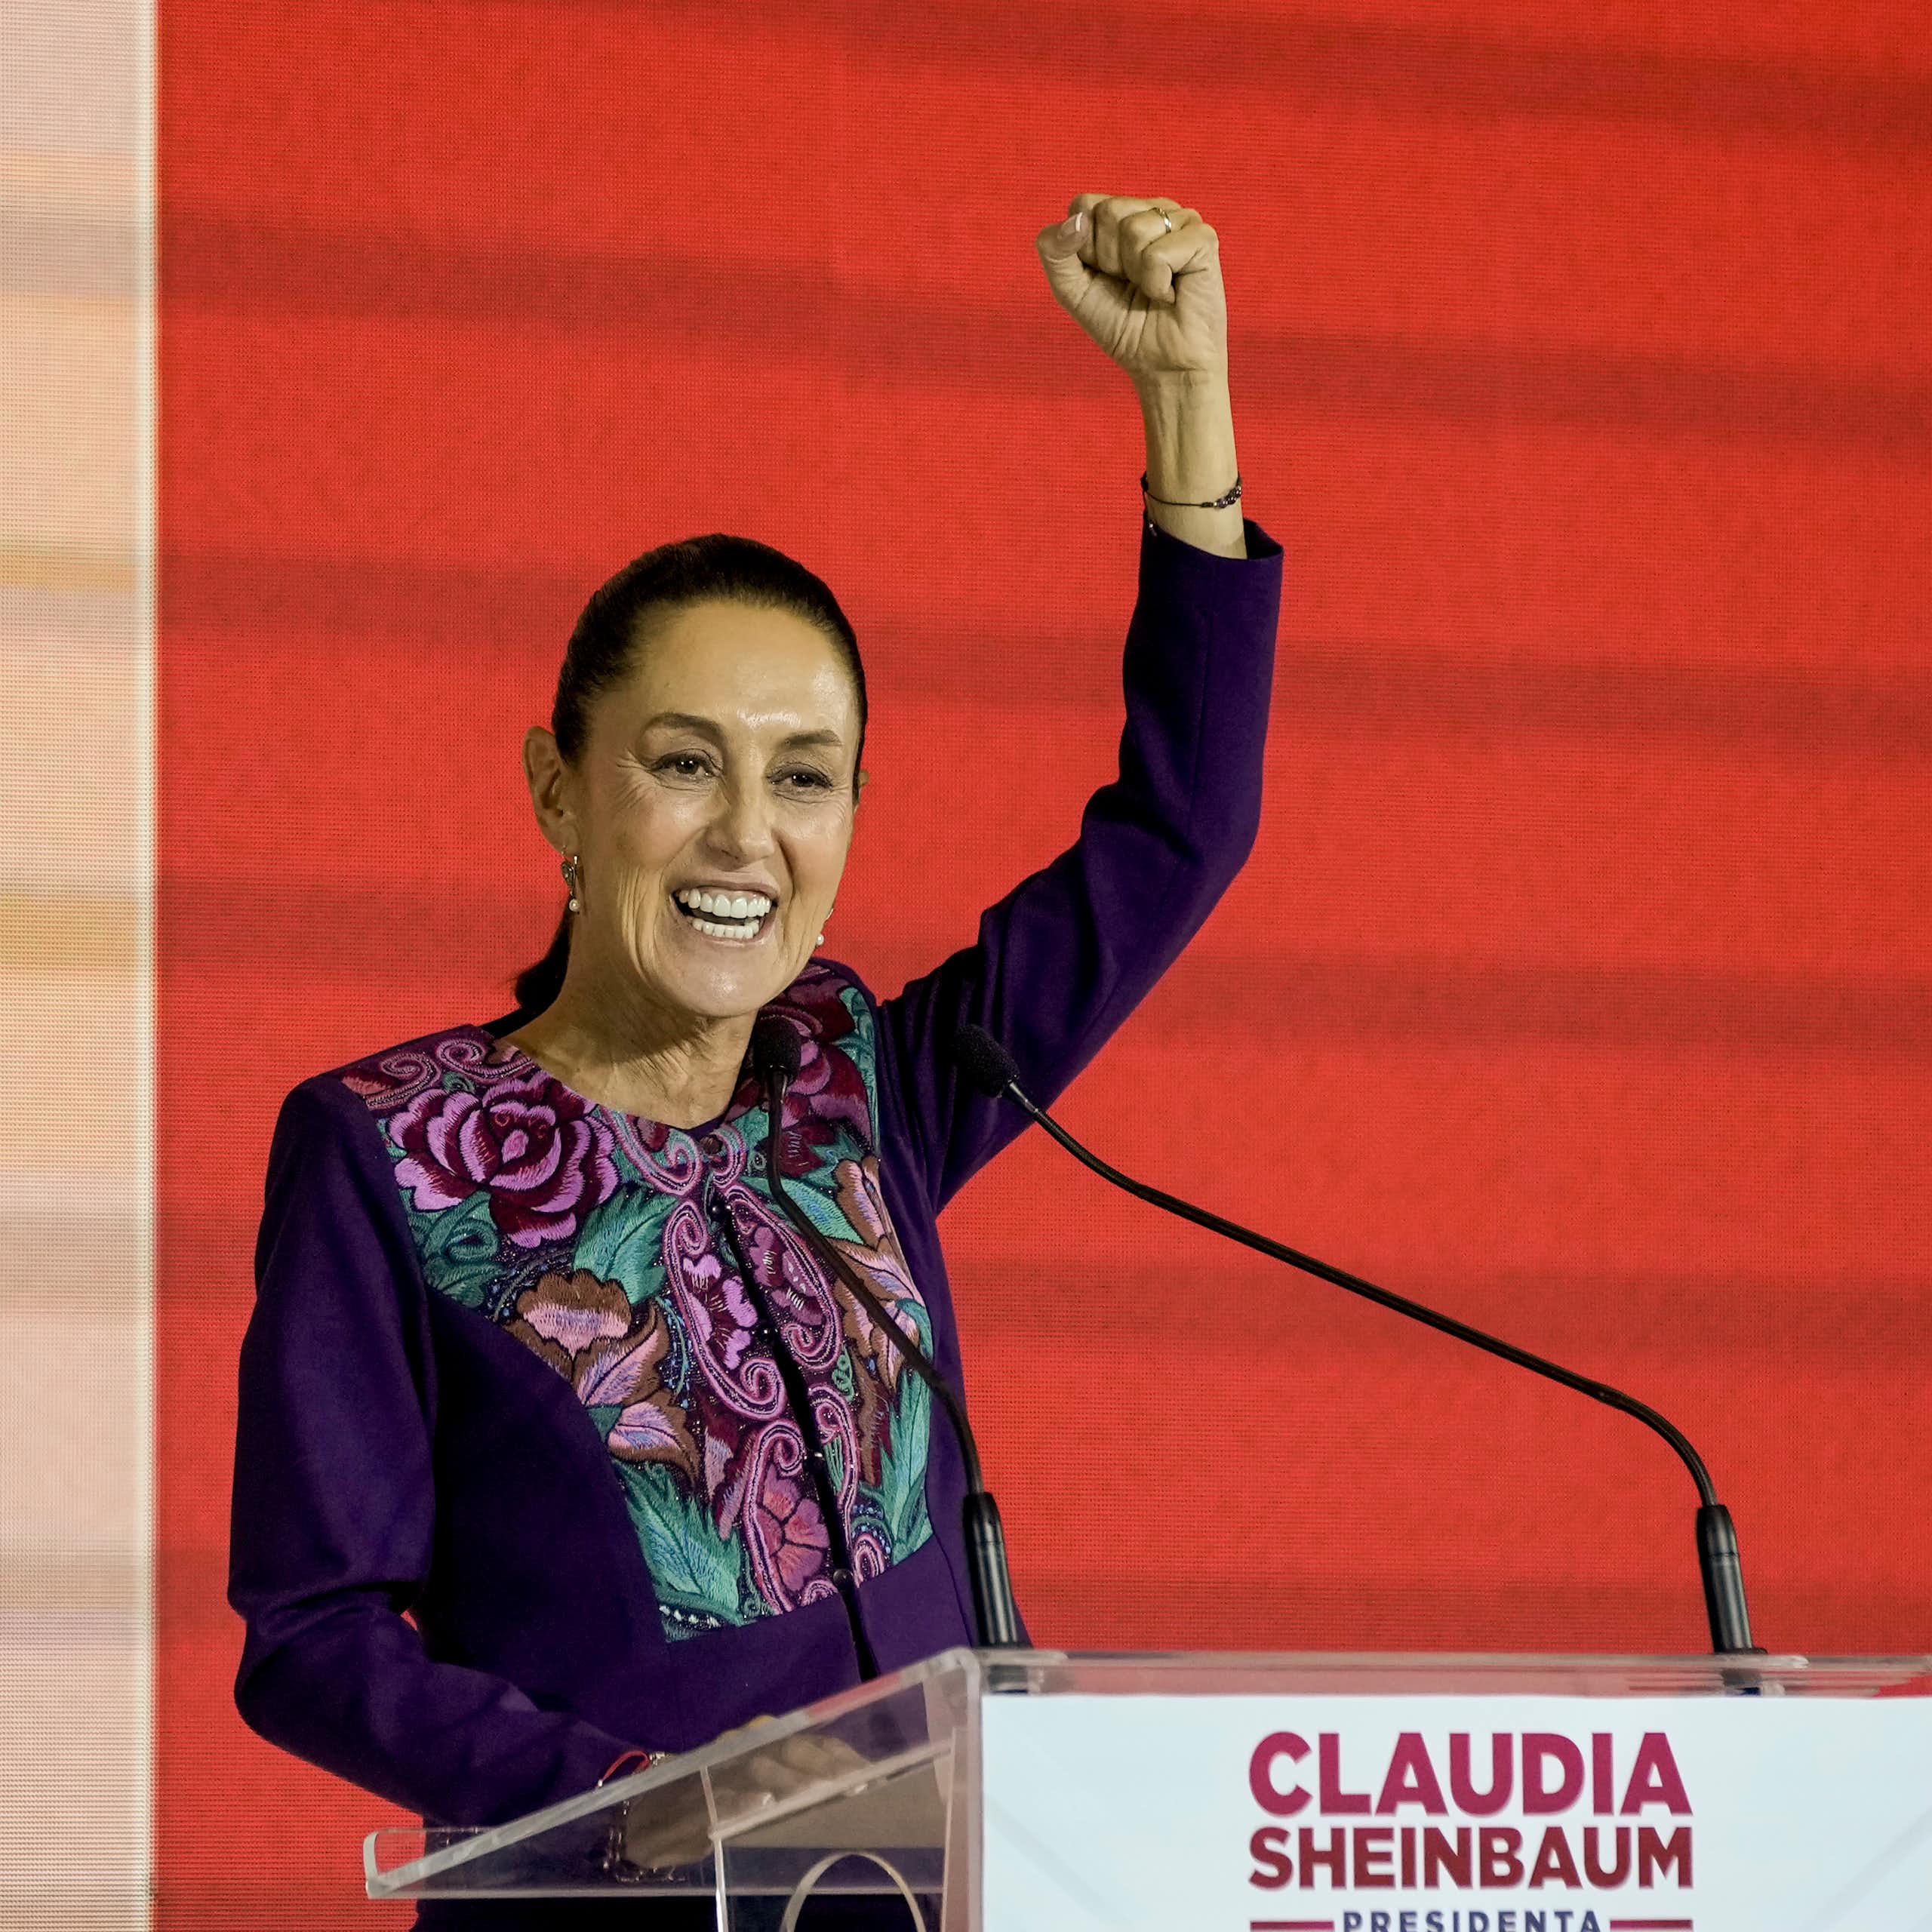 Mexico has elected its first female president. Claudia Sheinbaum inherits a country ravaged by violence – and searching for hope